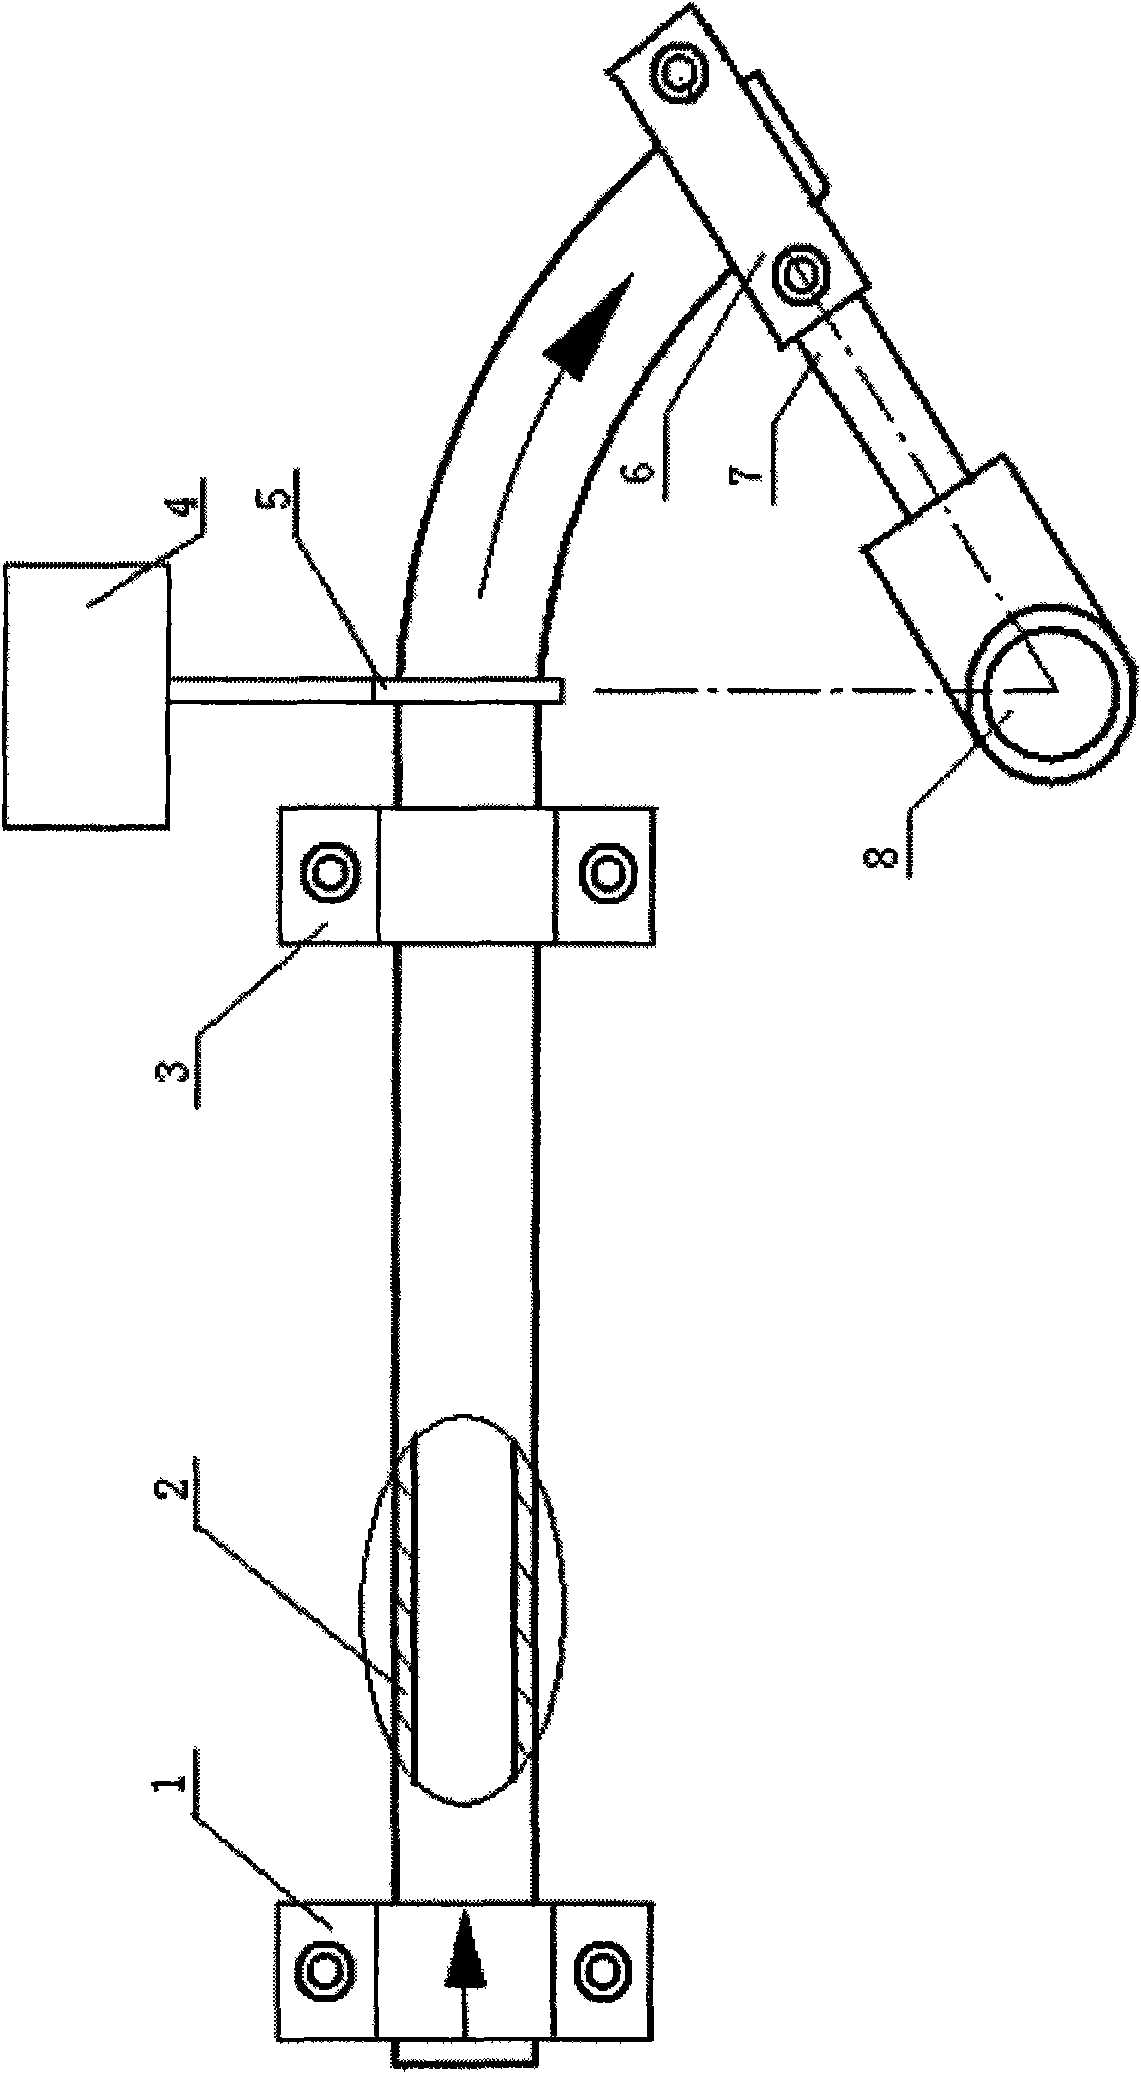 Continuous casting method of large-length hollow ductile cast iron sections and method for arcing hollow ductile cast iron sections after local continuous heating